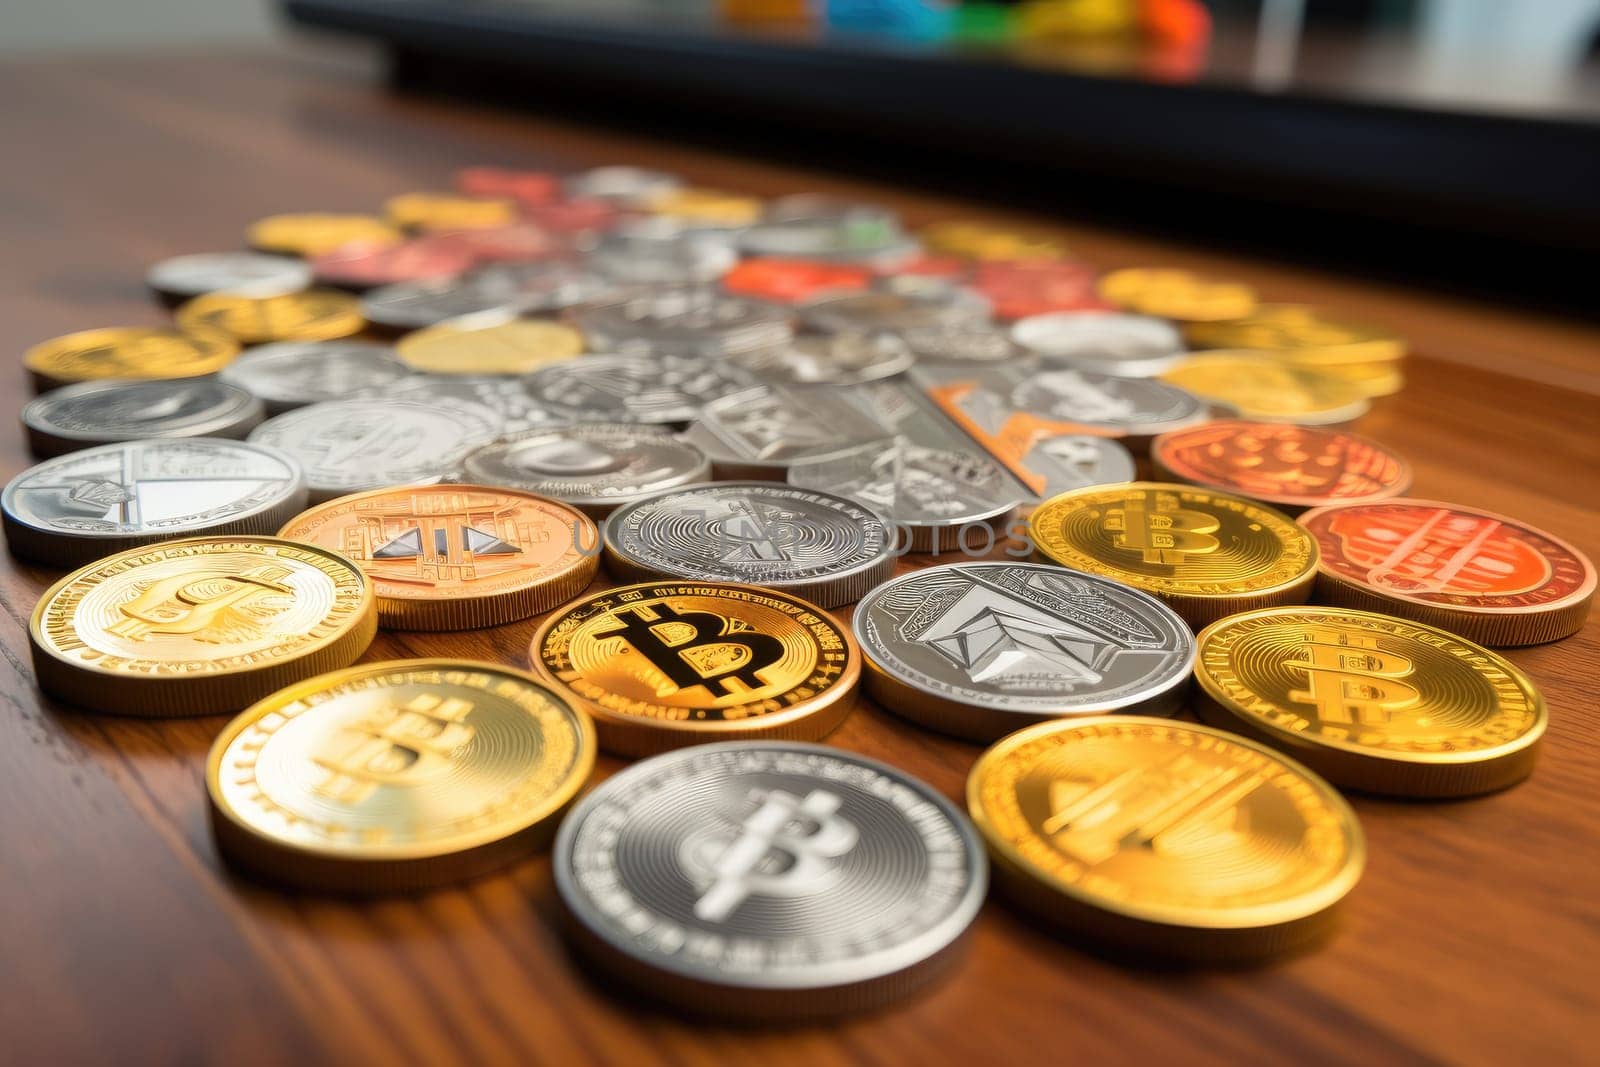 Coins of different cryptocurrencies. by Yurich32